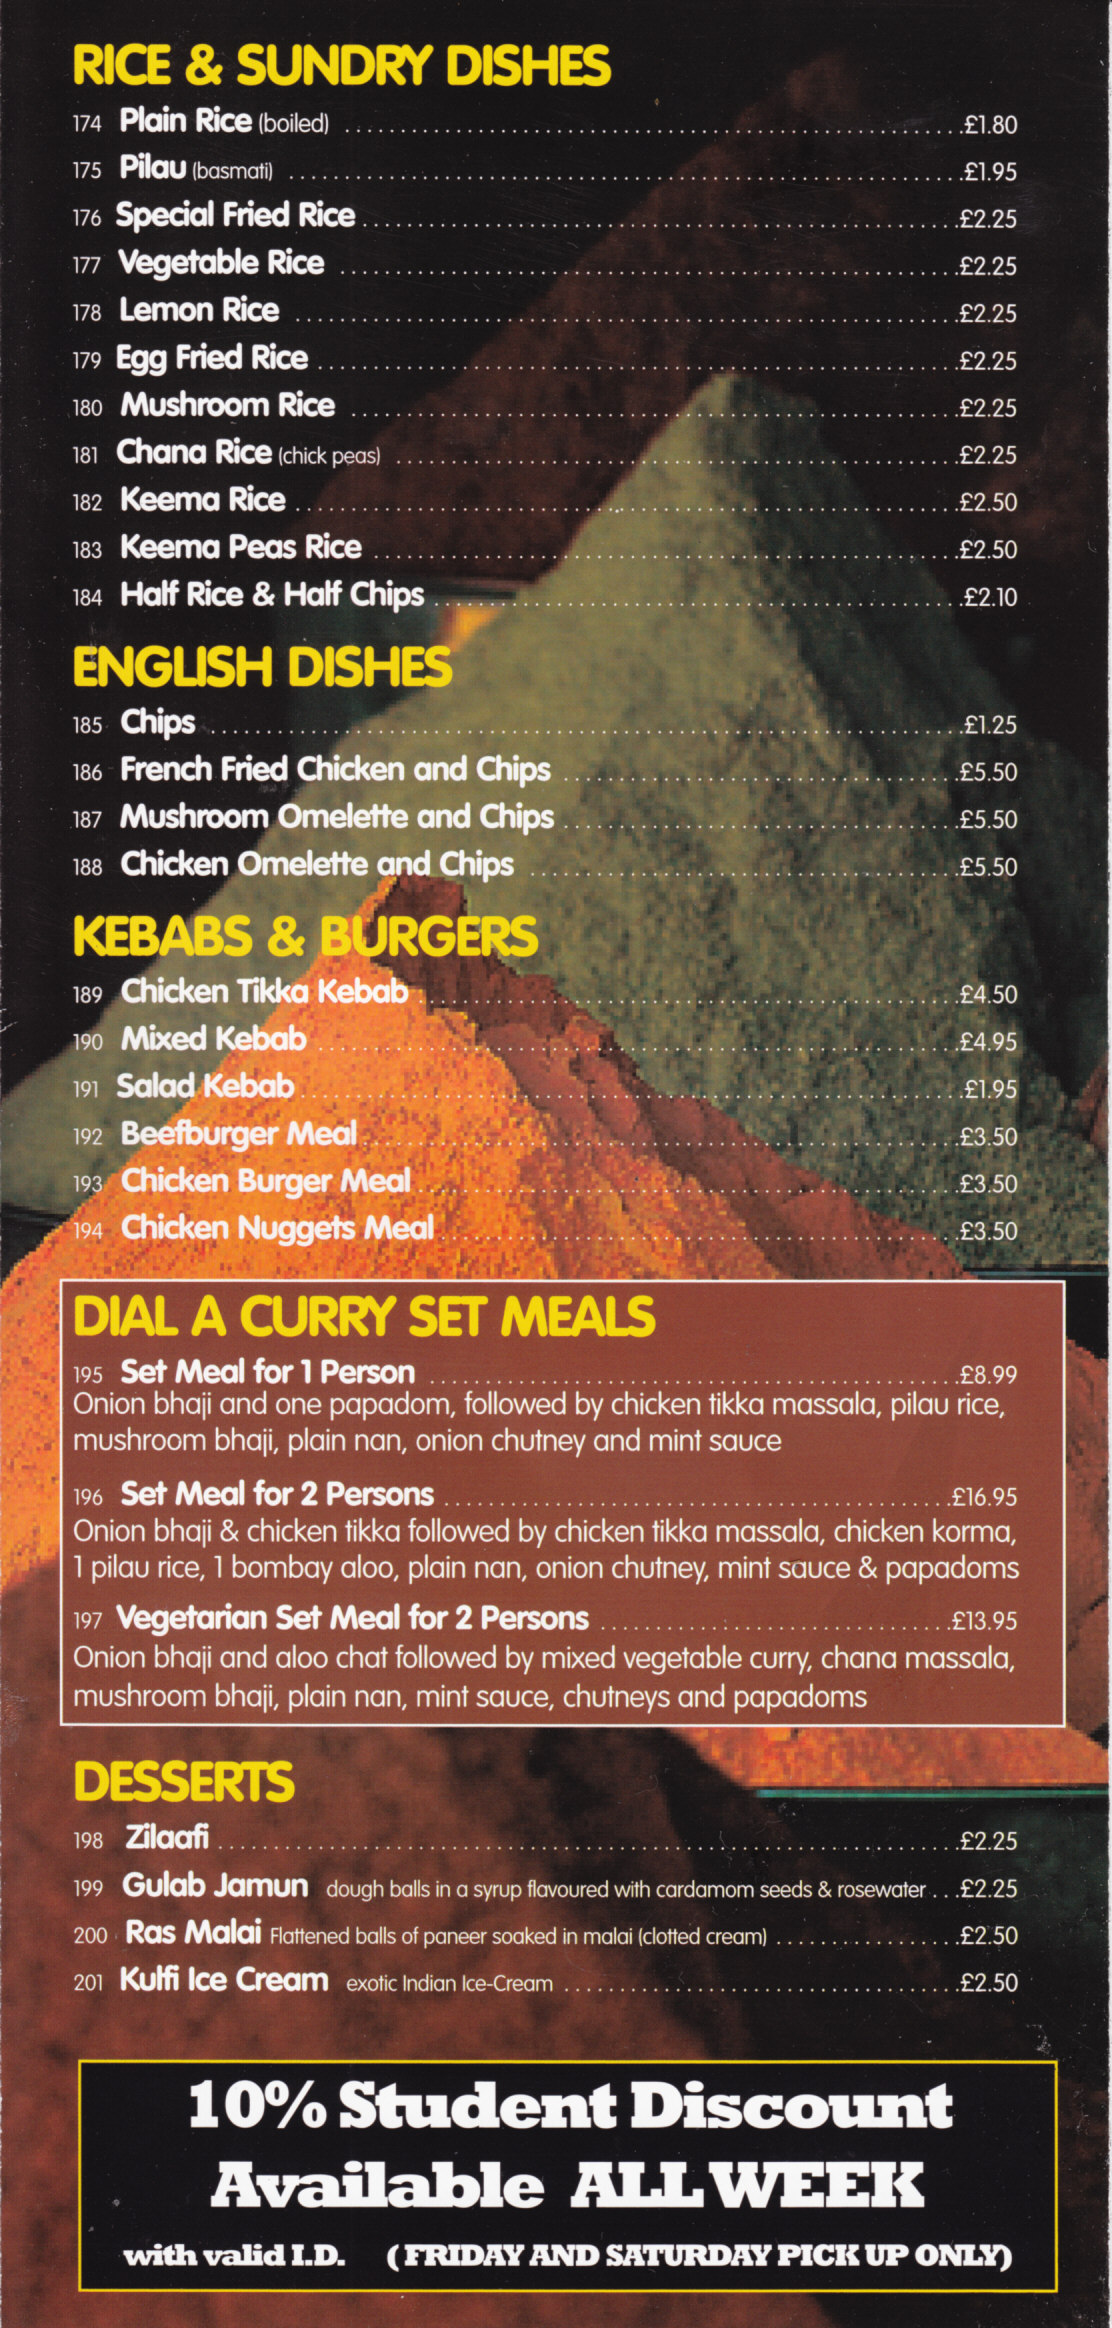 dial a curry swansea